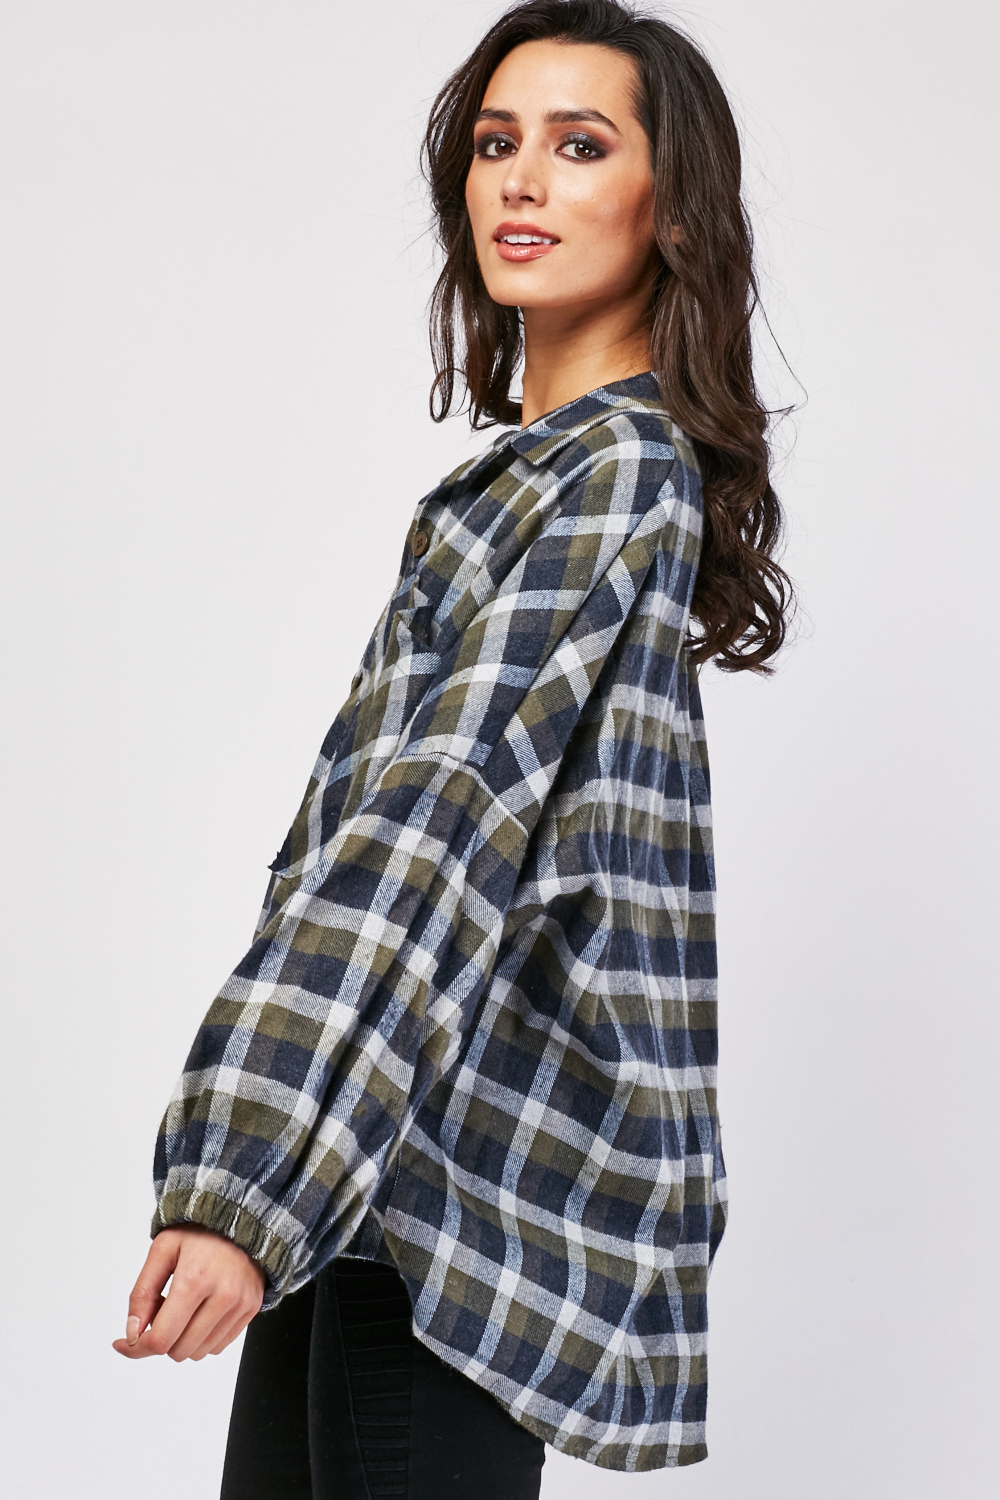 Slouchy Checkered Overshirt - Just $7